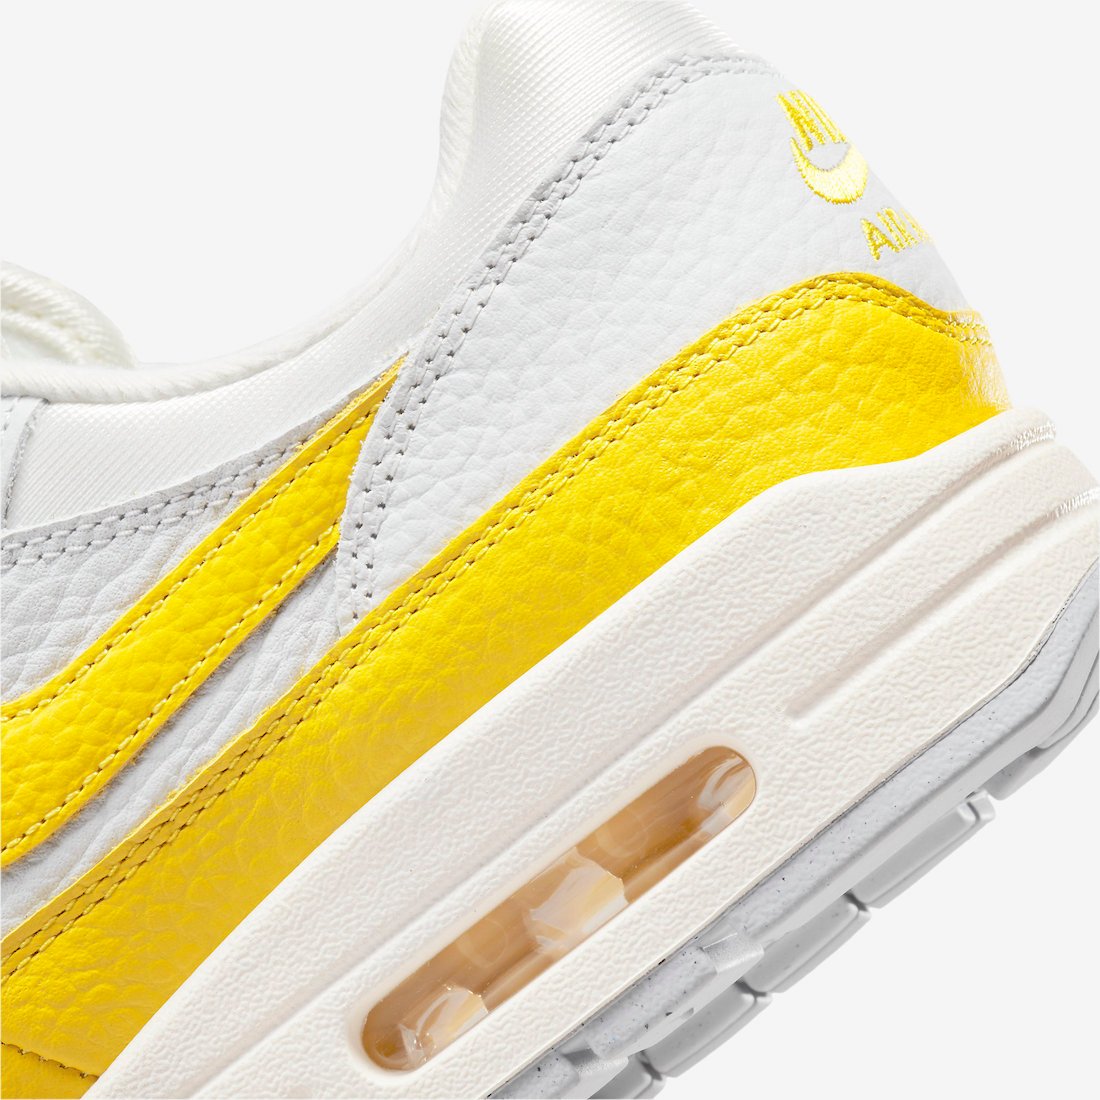 Nike Air Max 1 White Yellow DX2954-001 Release Date Info